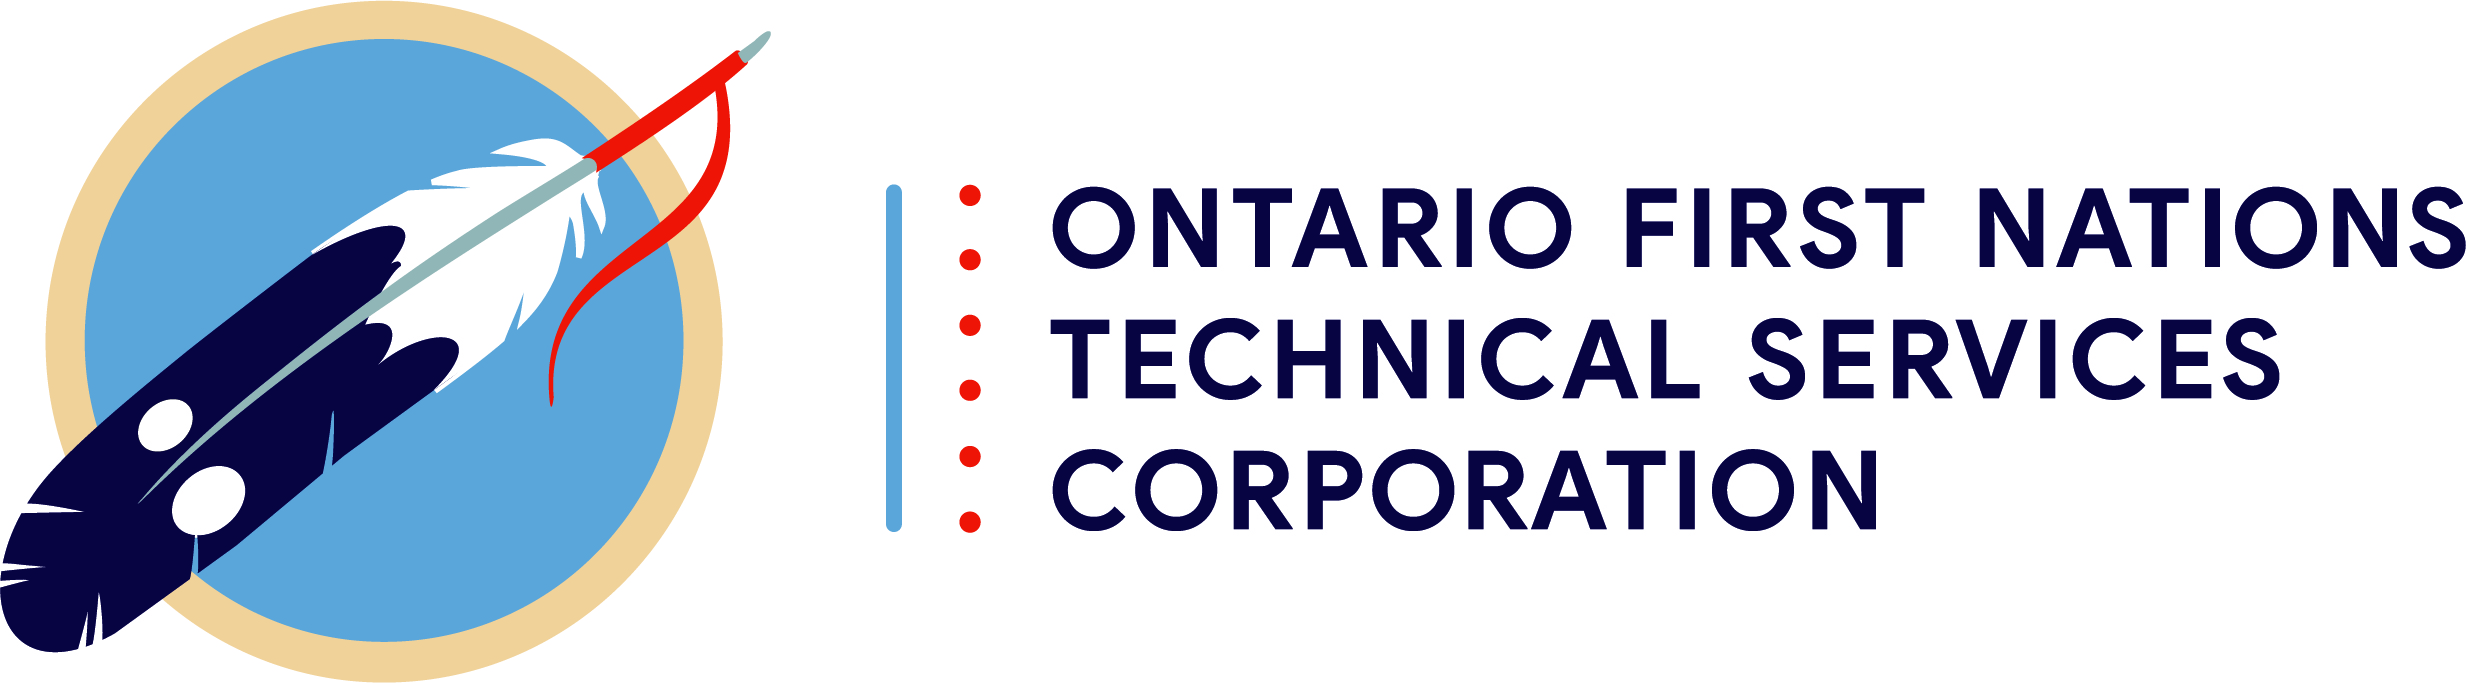 Ontario First Nations Technical Services Corporation Logo